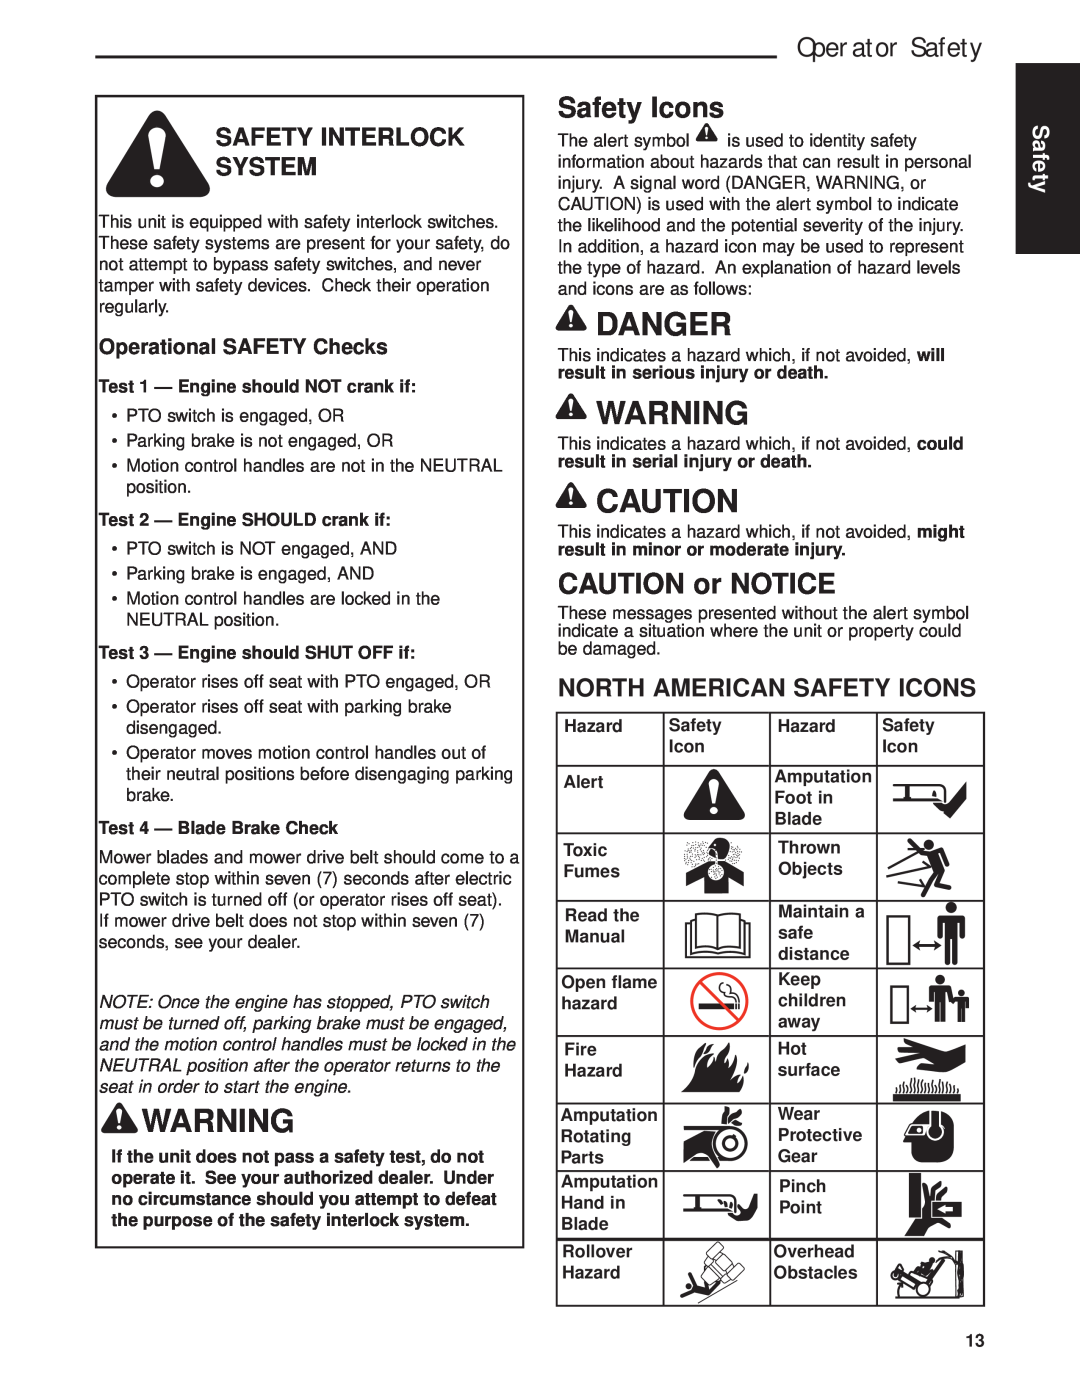 Briggs & Stratton 5901170, 5900625 Danger, CAUTION or NOTICE, Safety Interlock System, North American Safety Icons 